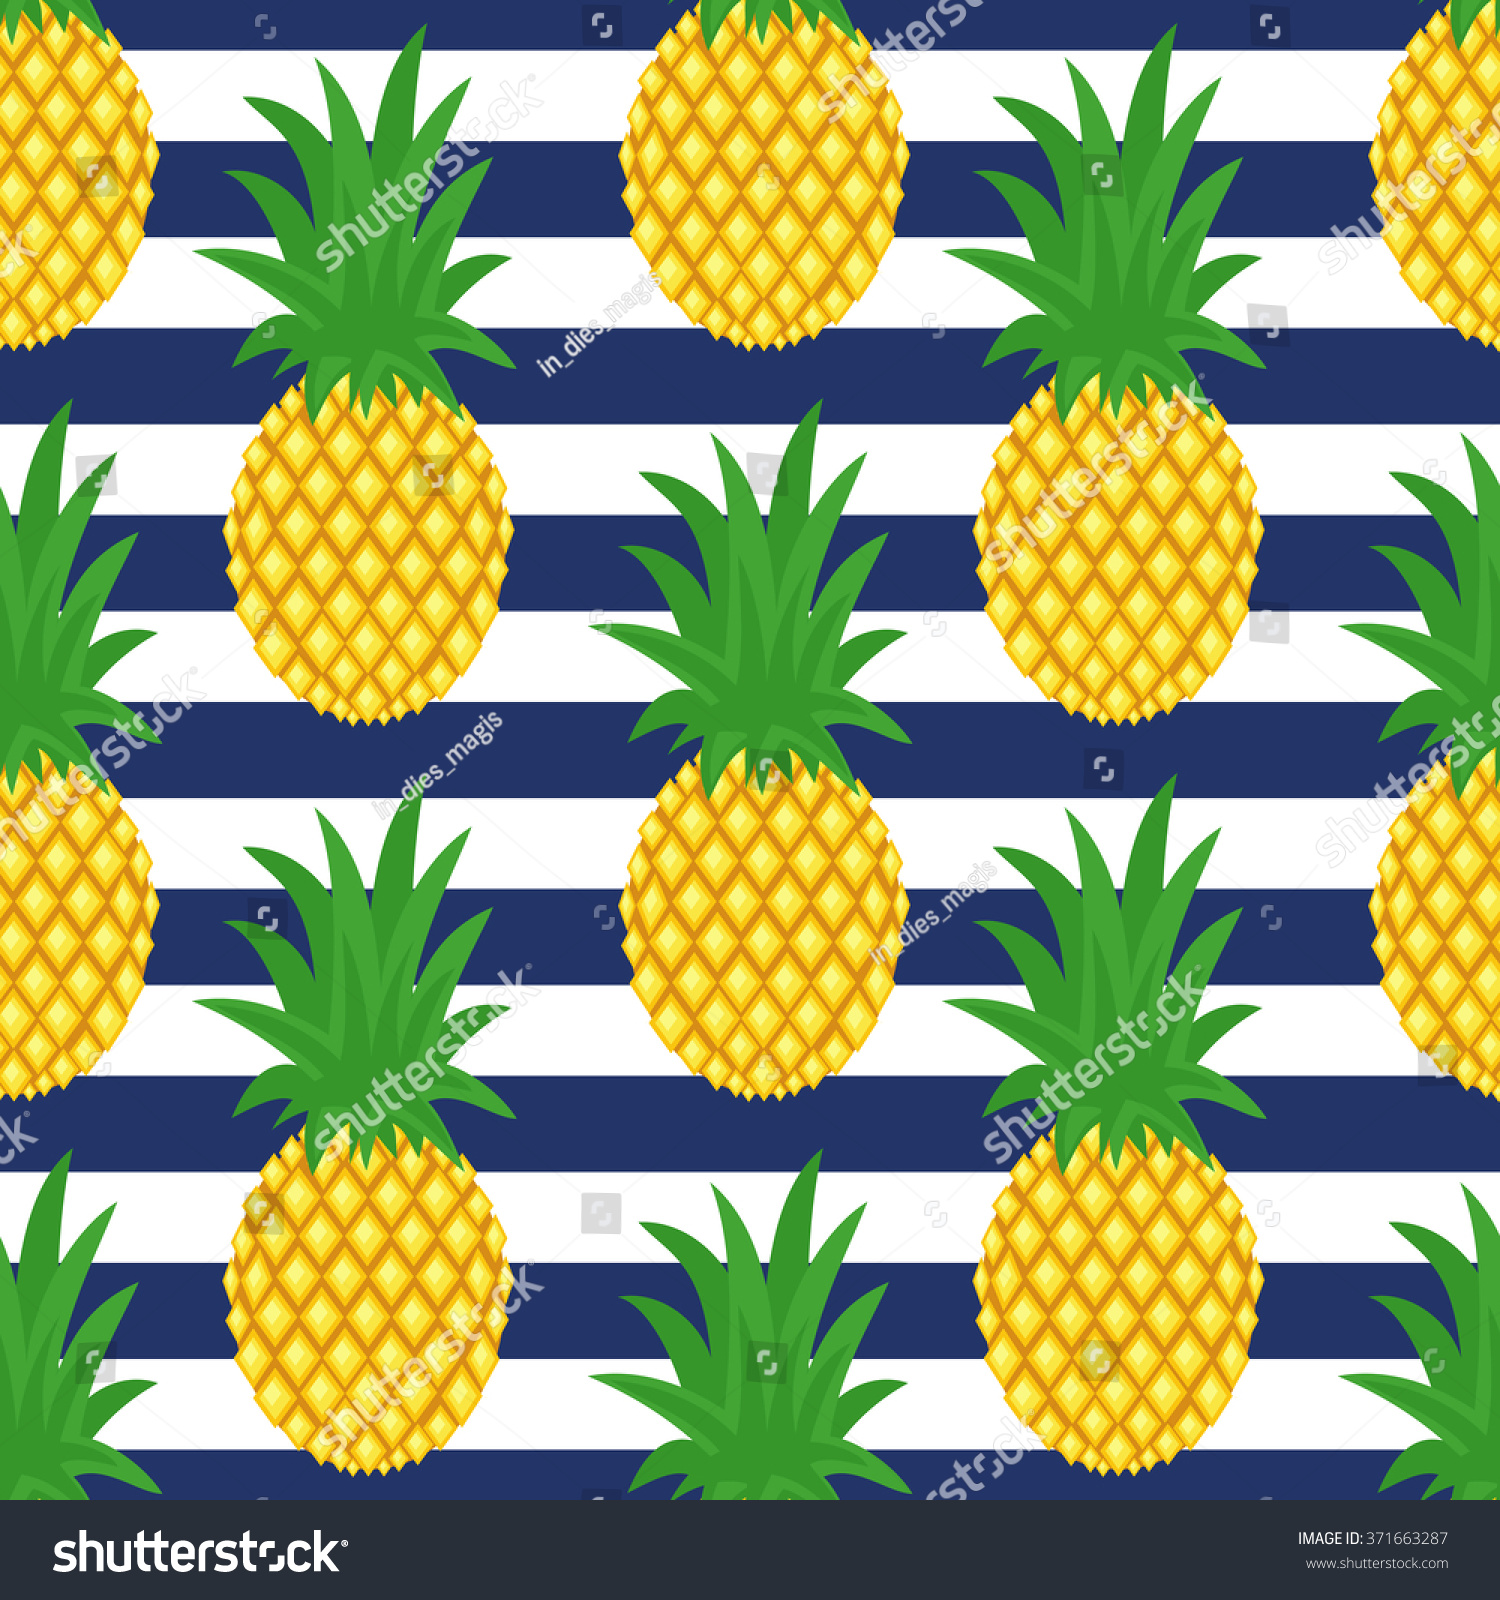 Pineapple On Striped Background Cute Vector Stock Vector 